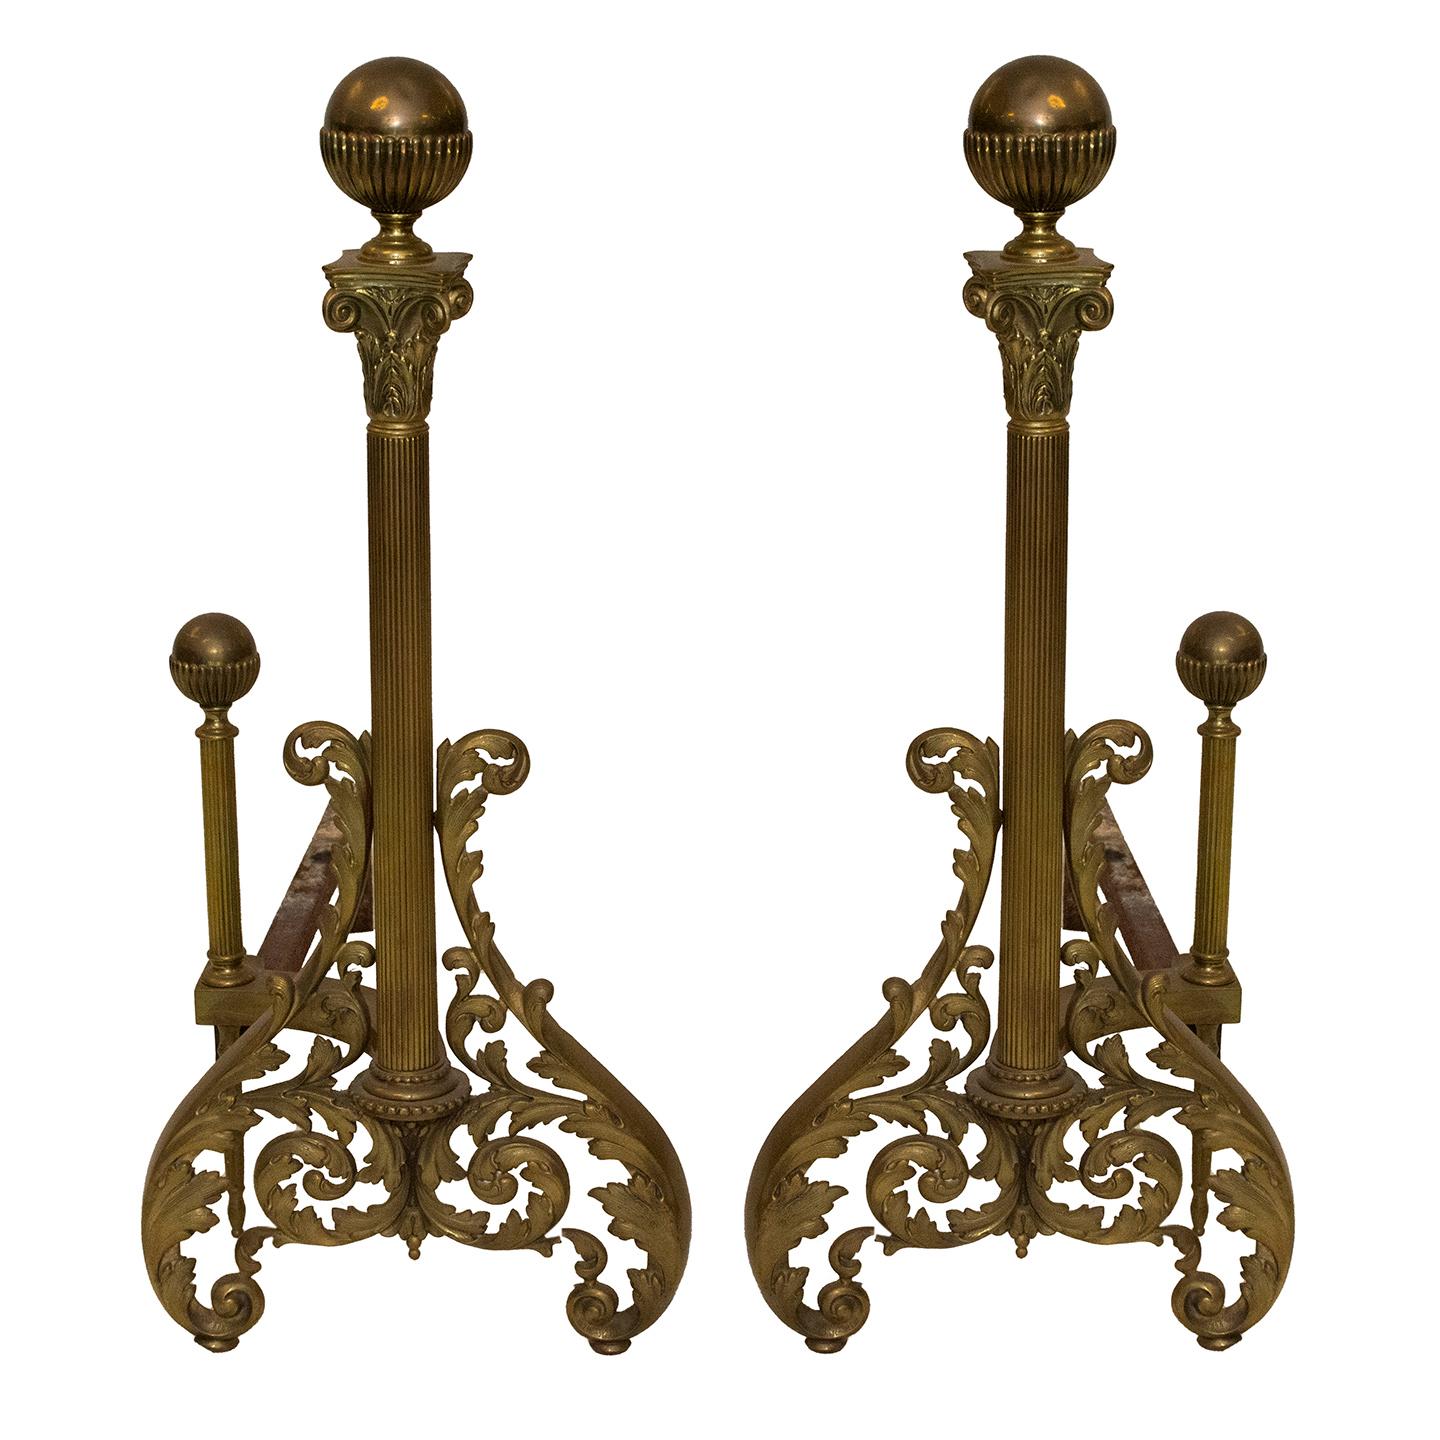 Late 20th Century Decorative Vintage Neoclassical-Inspired Brass and Iron Andirons For Sale